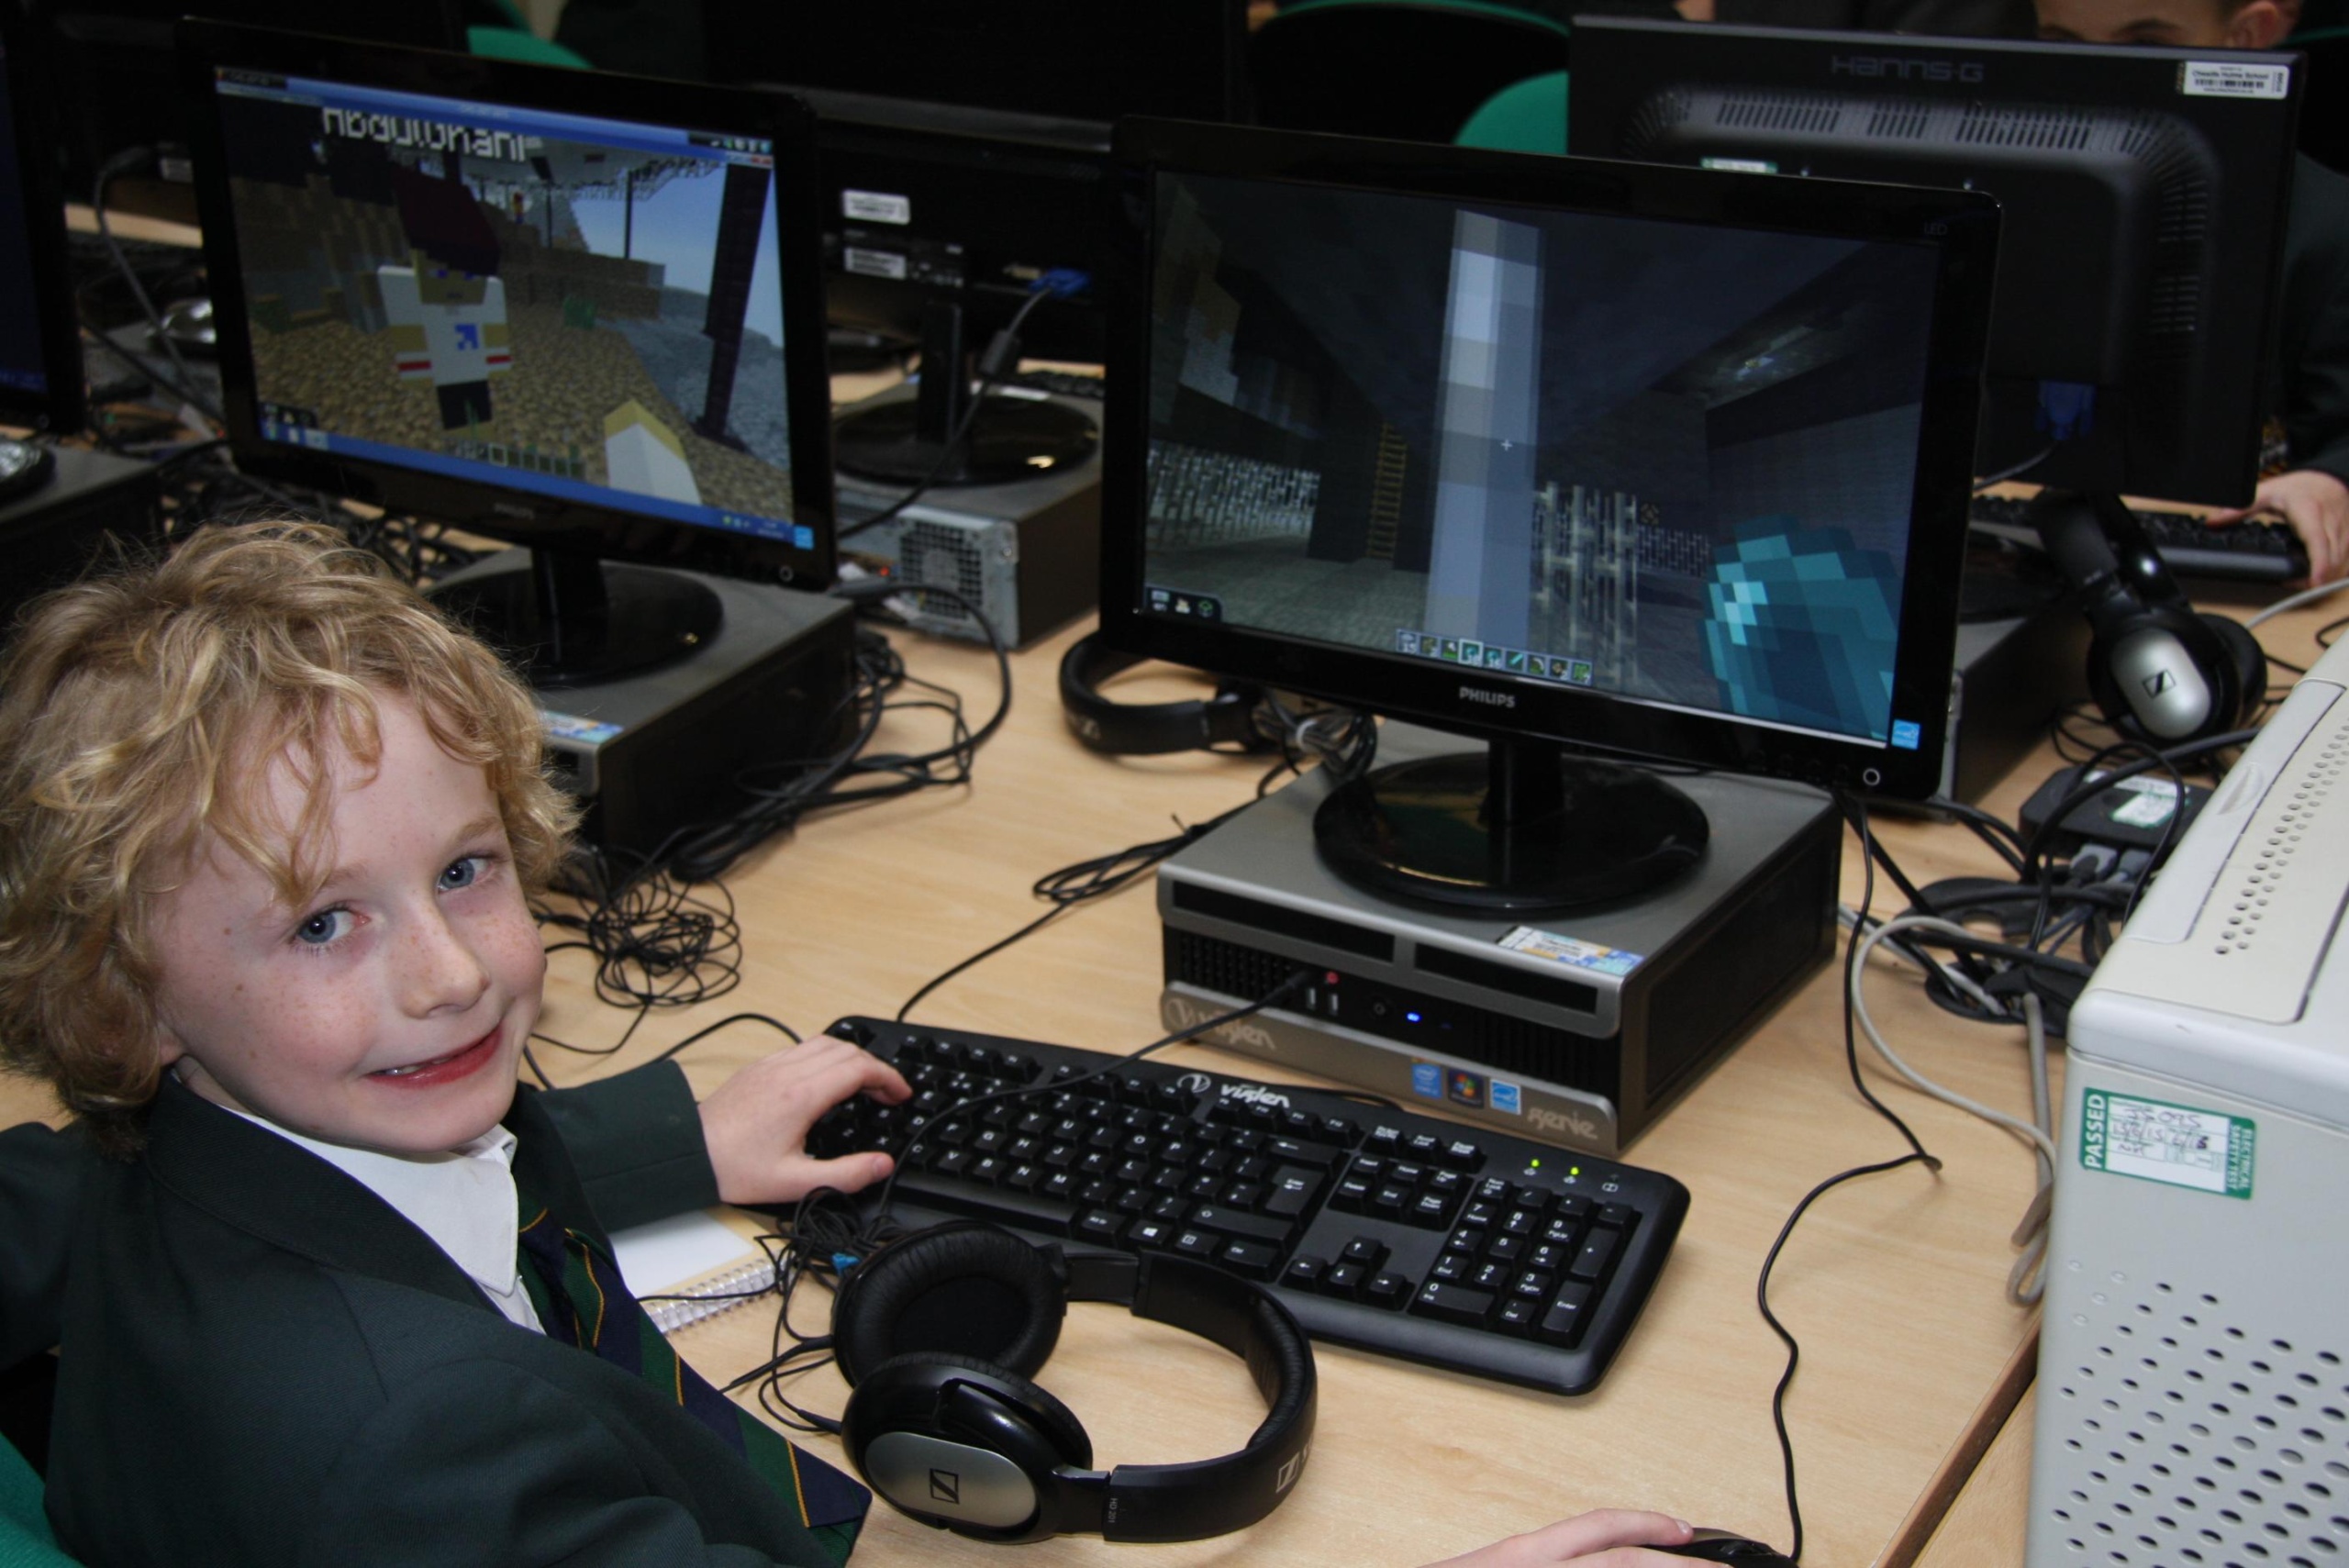 CHEADLE hulme school year 4 pupil kiaran sits at his computer where he types up his news report about the School's weekly Minecraft club during Journalism Club